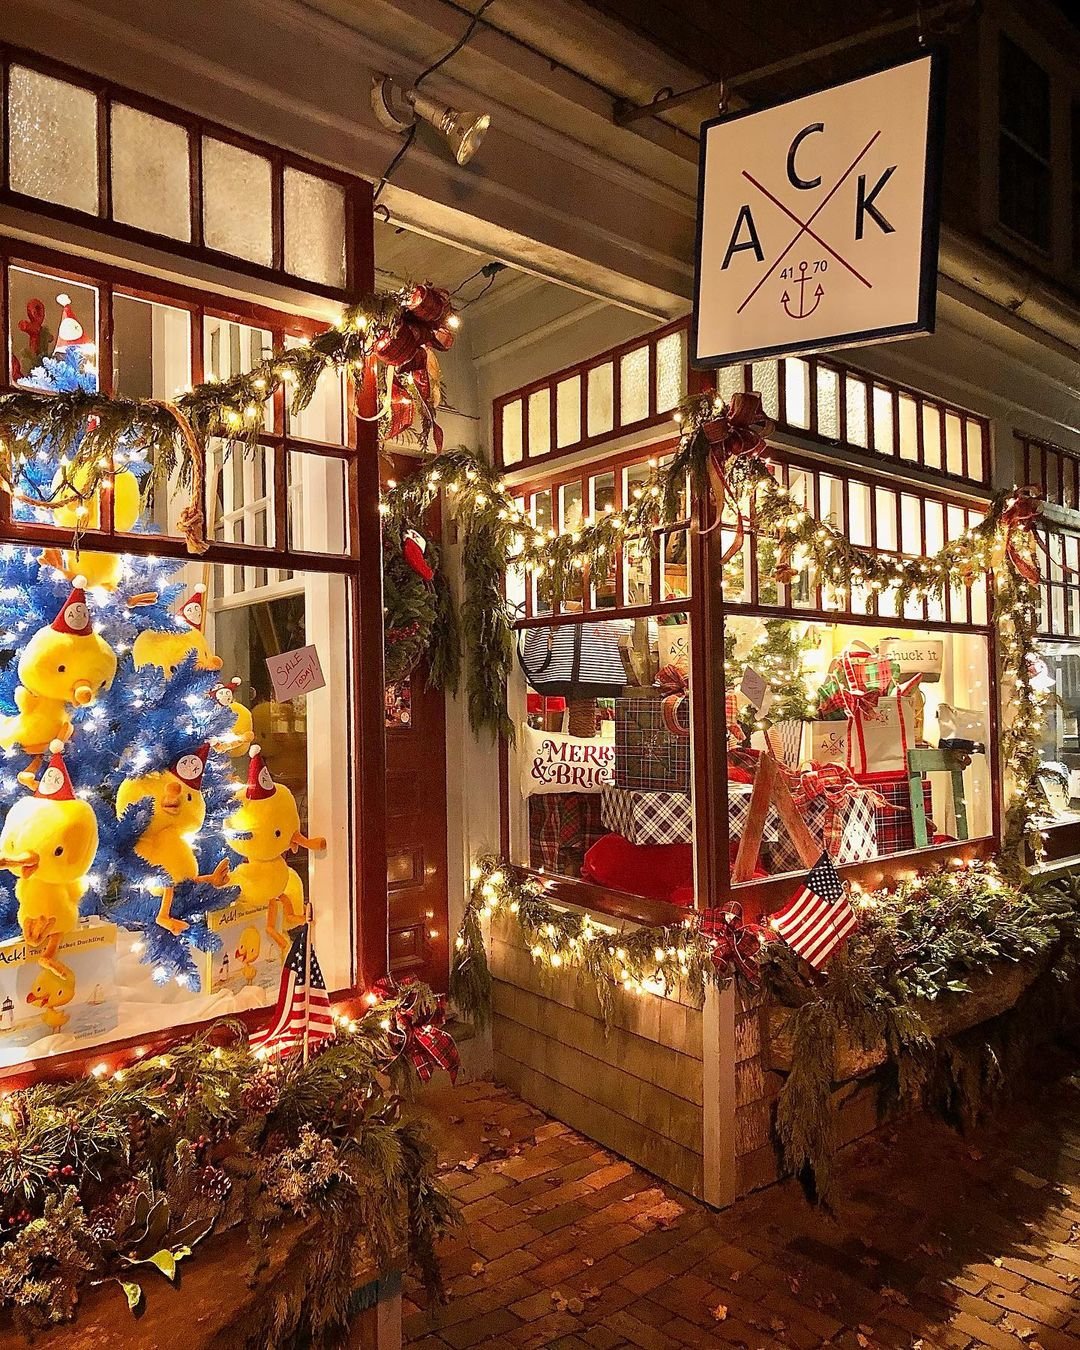 ACK 4170 on Federal Street took second place in the Nantucket Chamber of Commerce's Nantucket Noel People's Choice Storefront Decorating Contest.